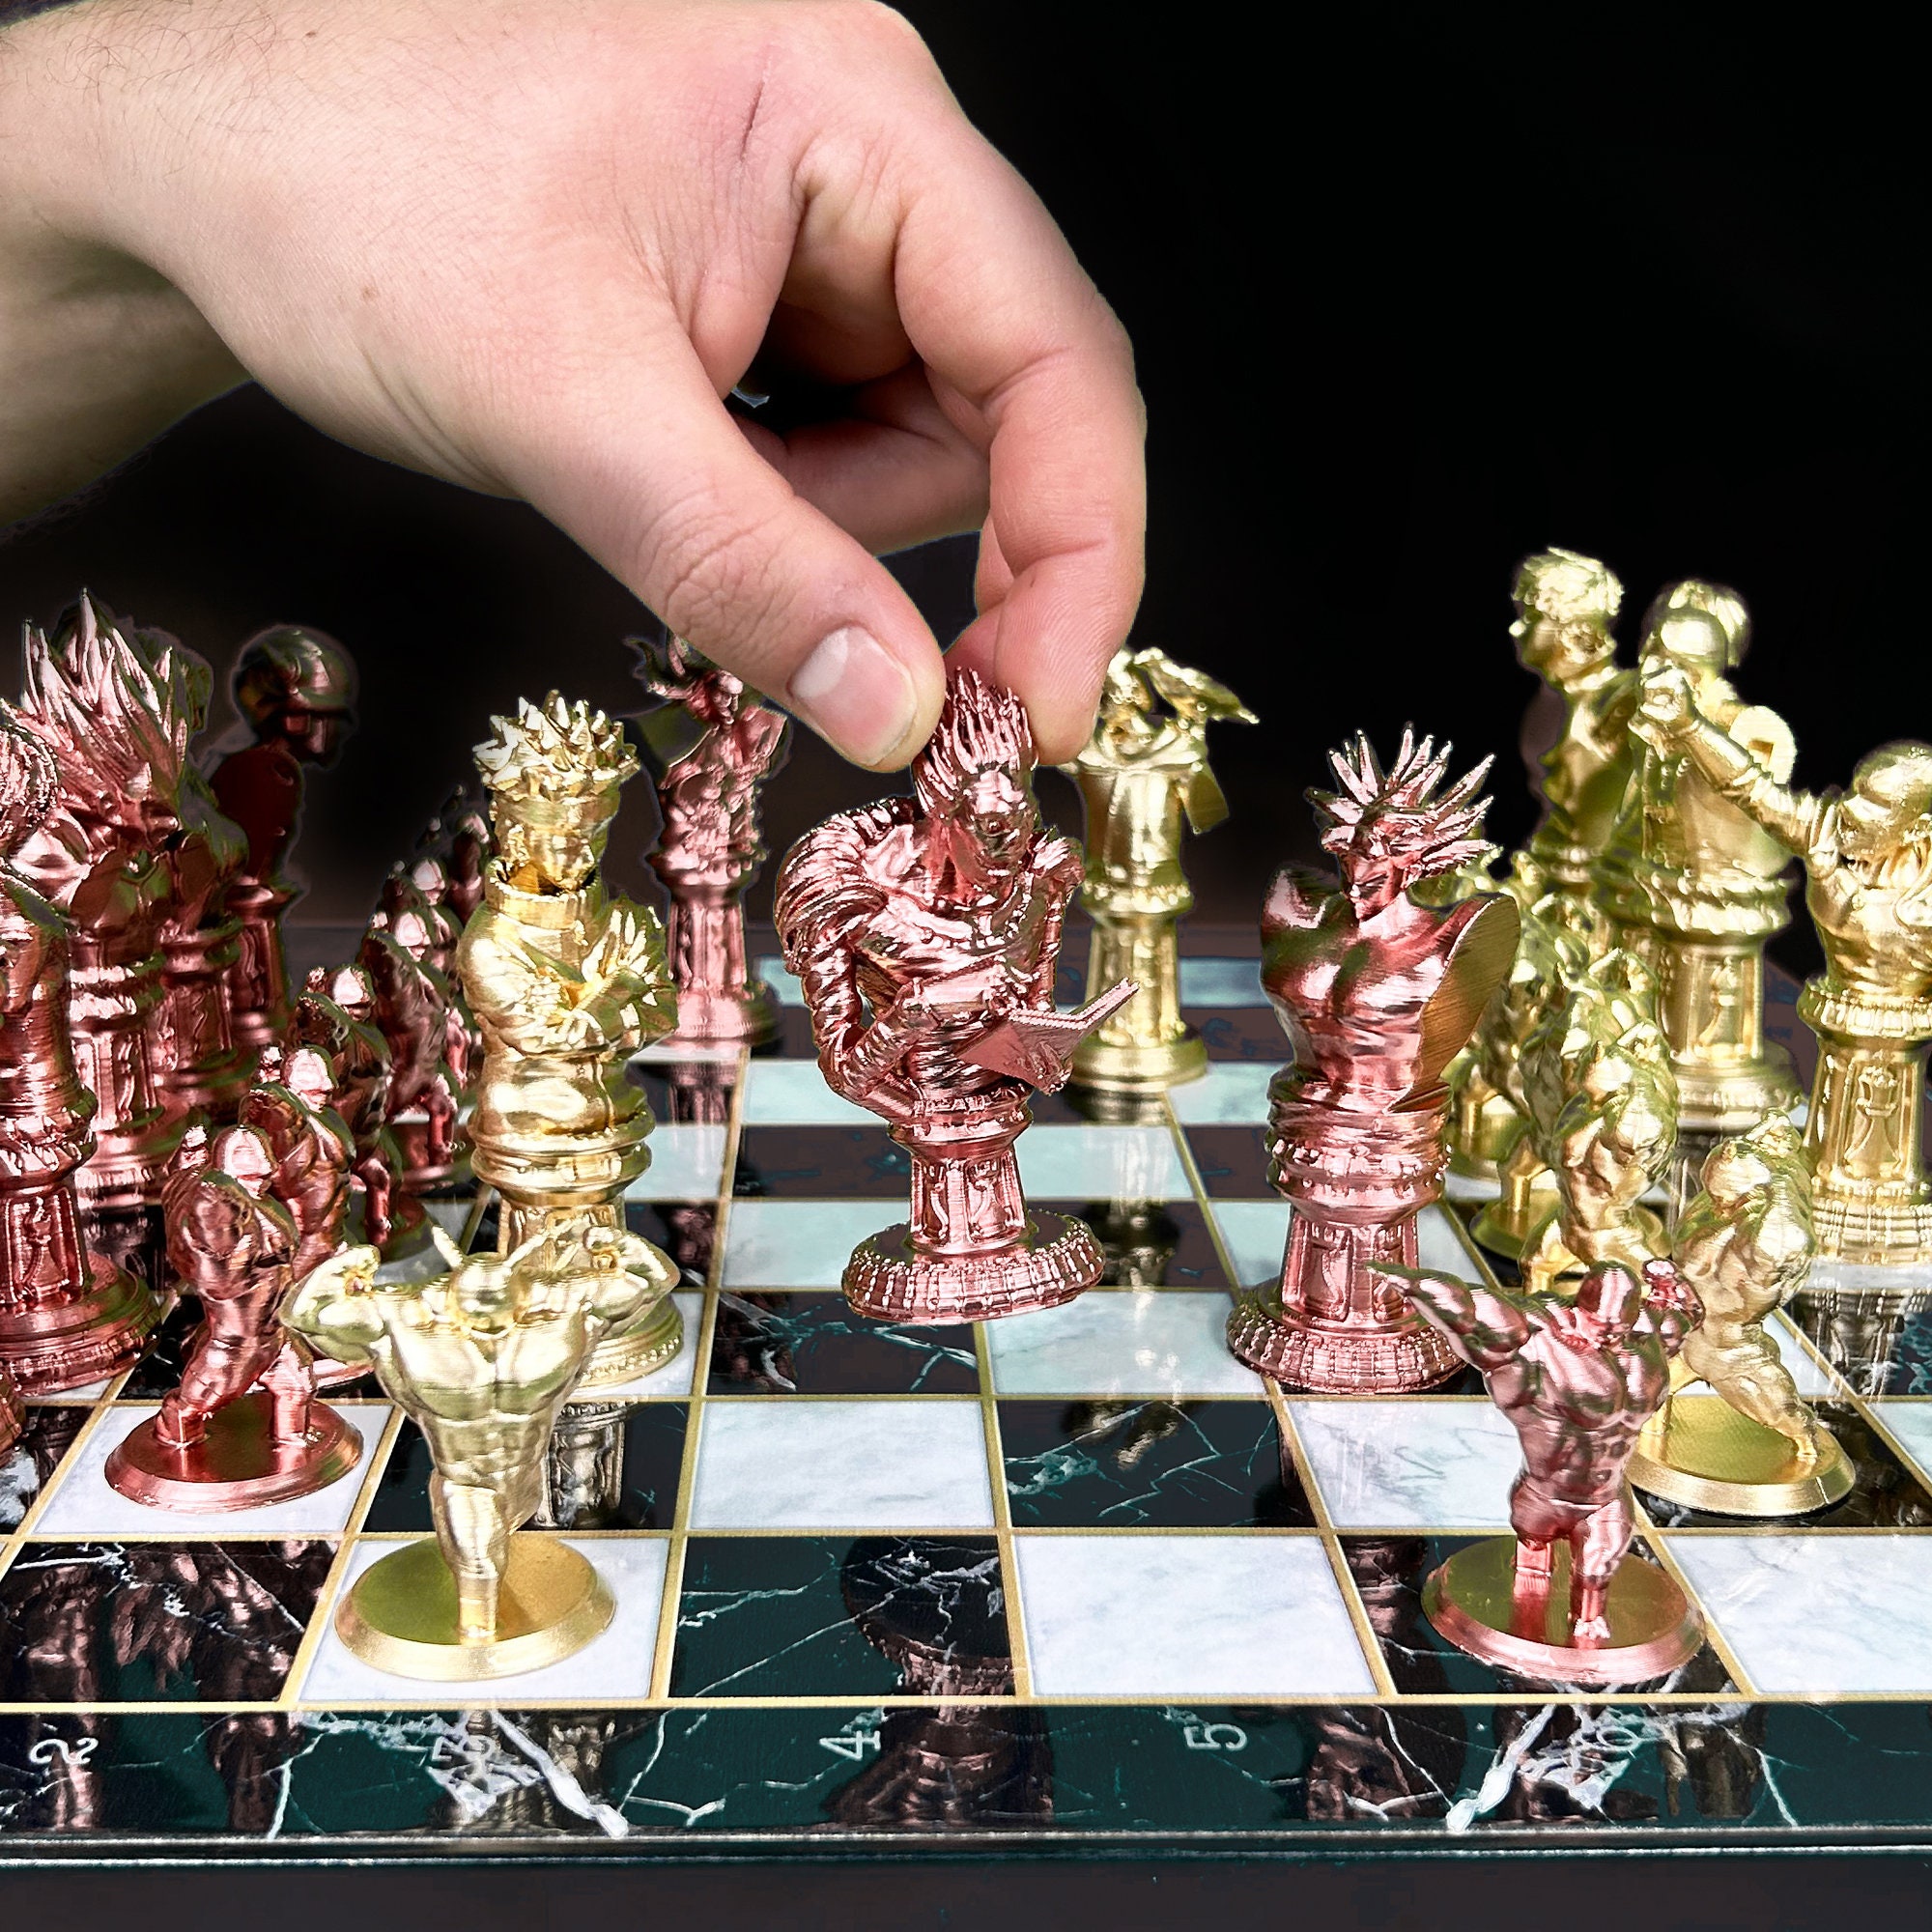 Buy Anime Chess Set With Chessboard Anime Chess Set Color Online in India   Etsy